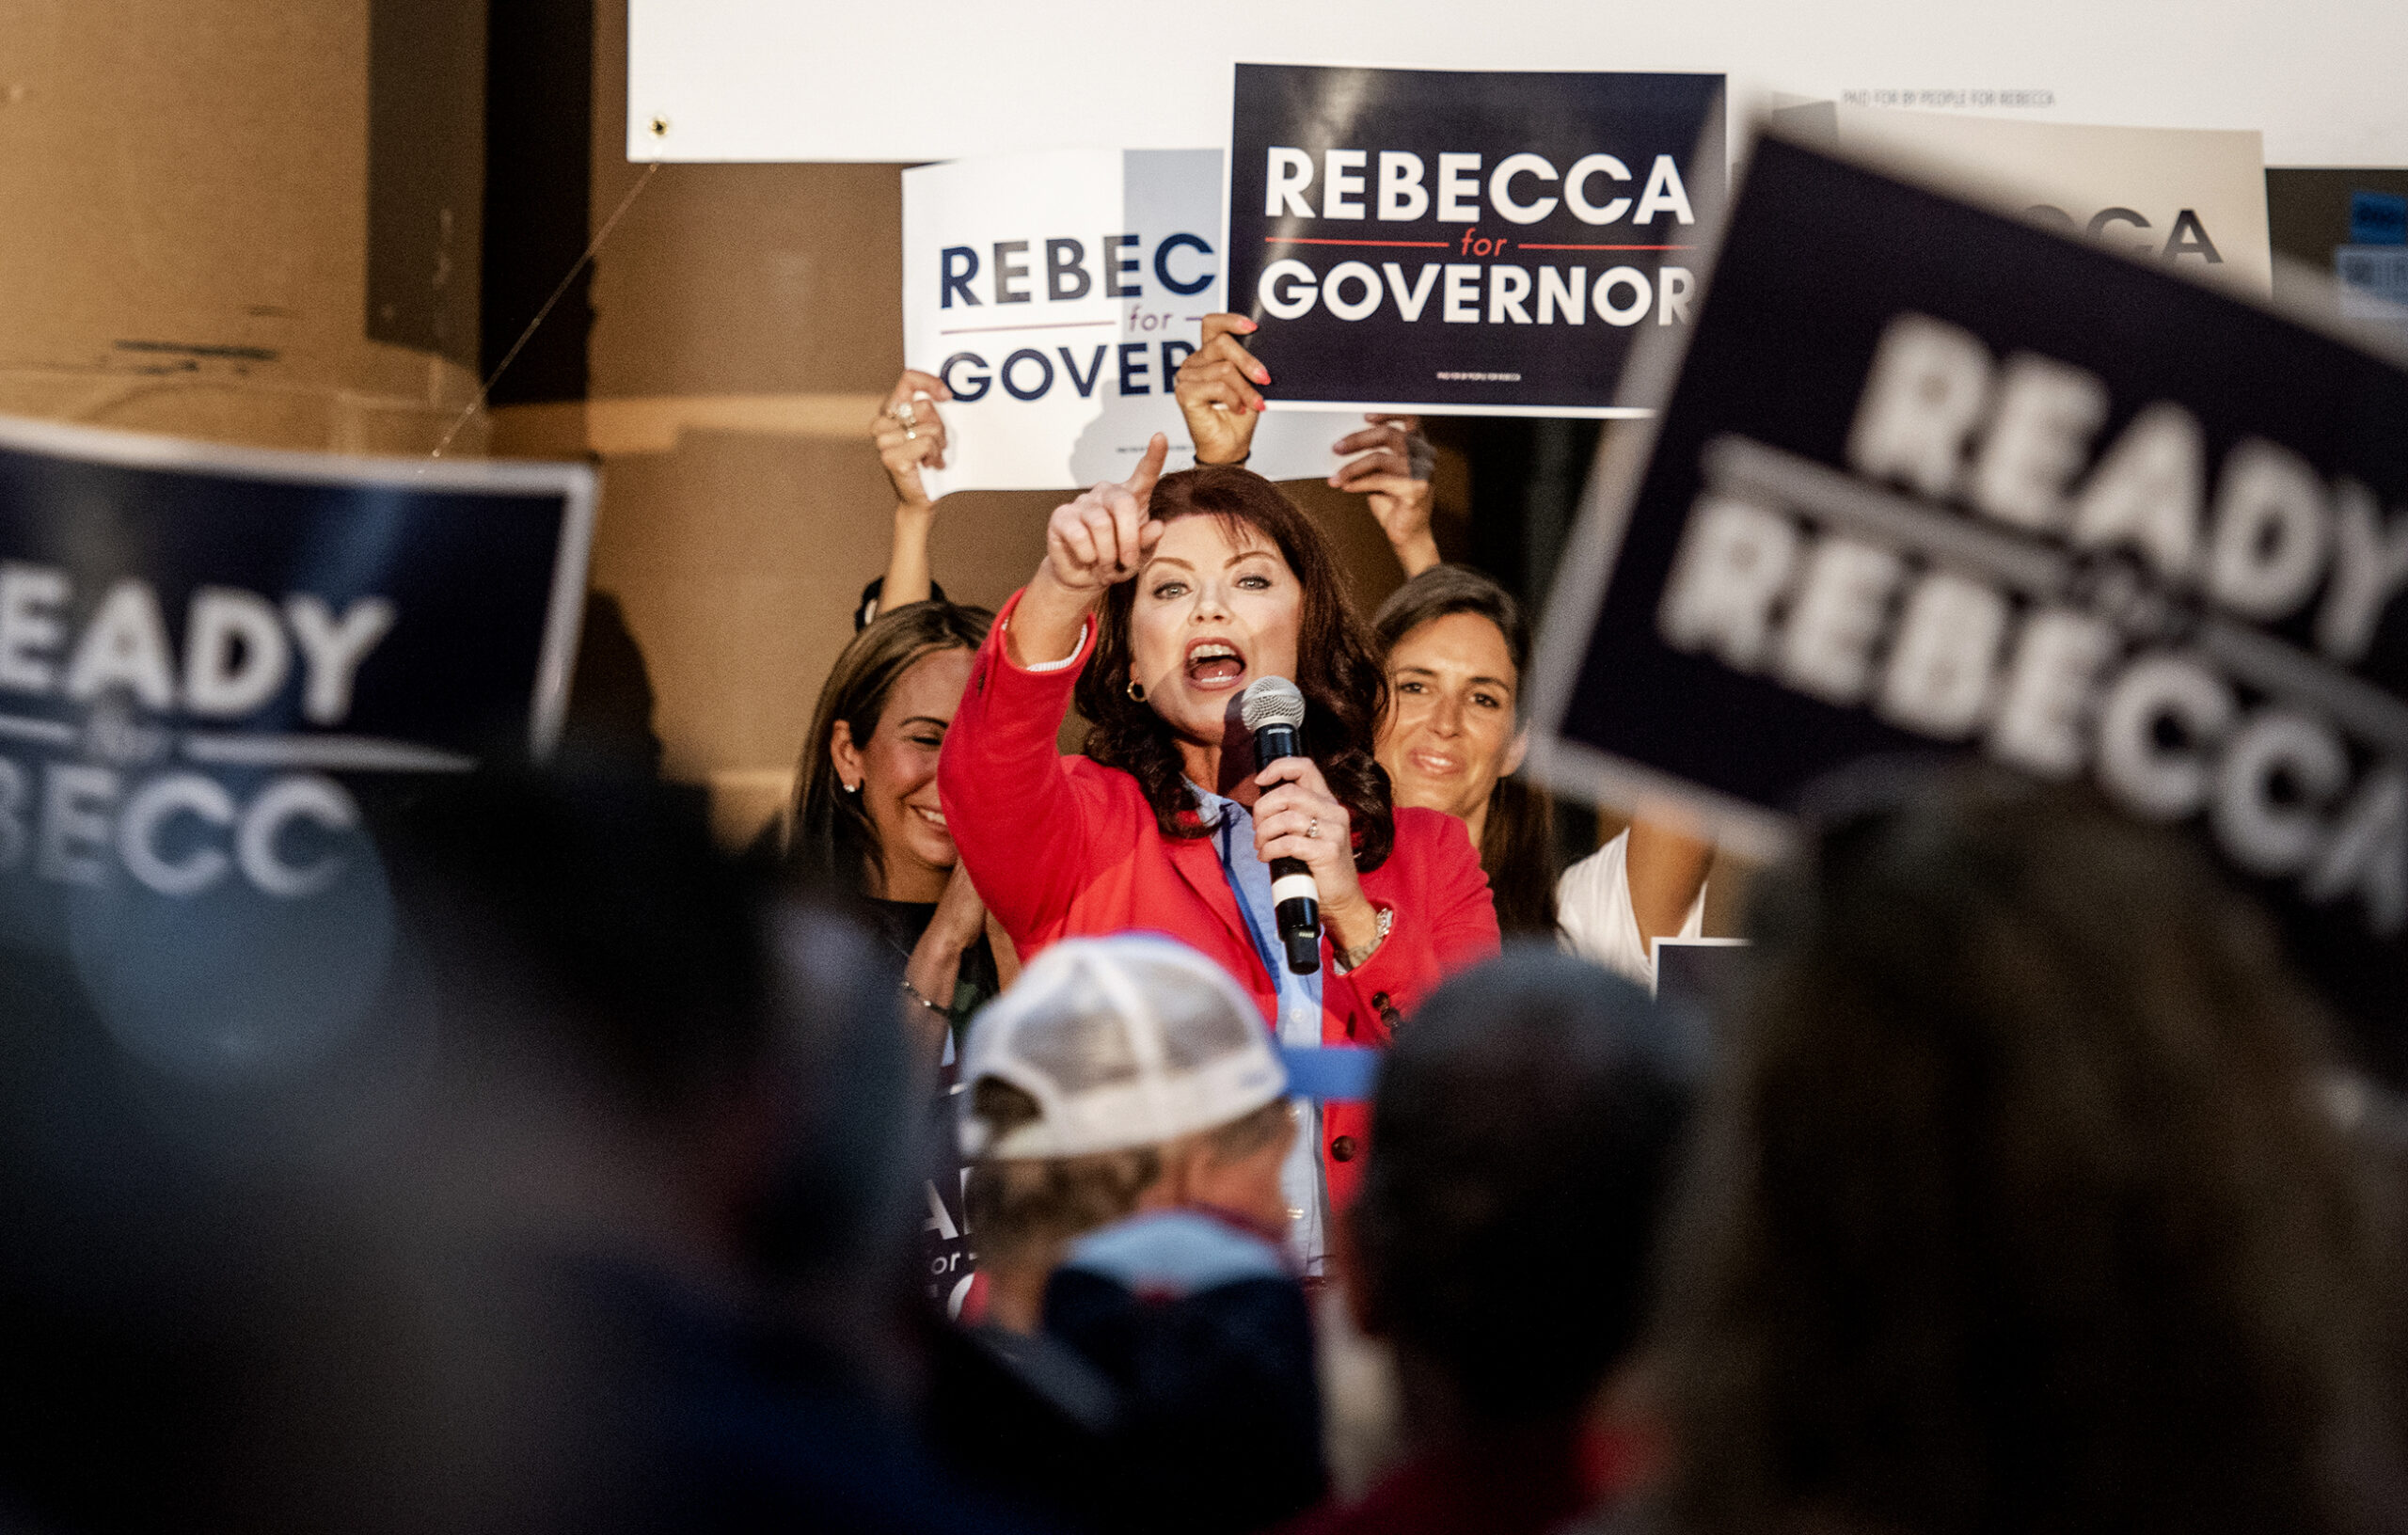 People in the crowd hold up campaign signs as Rebecca Kleefisch points to them while speaking into a microphone.